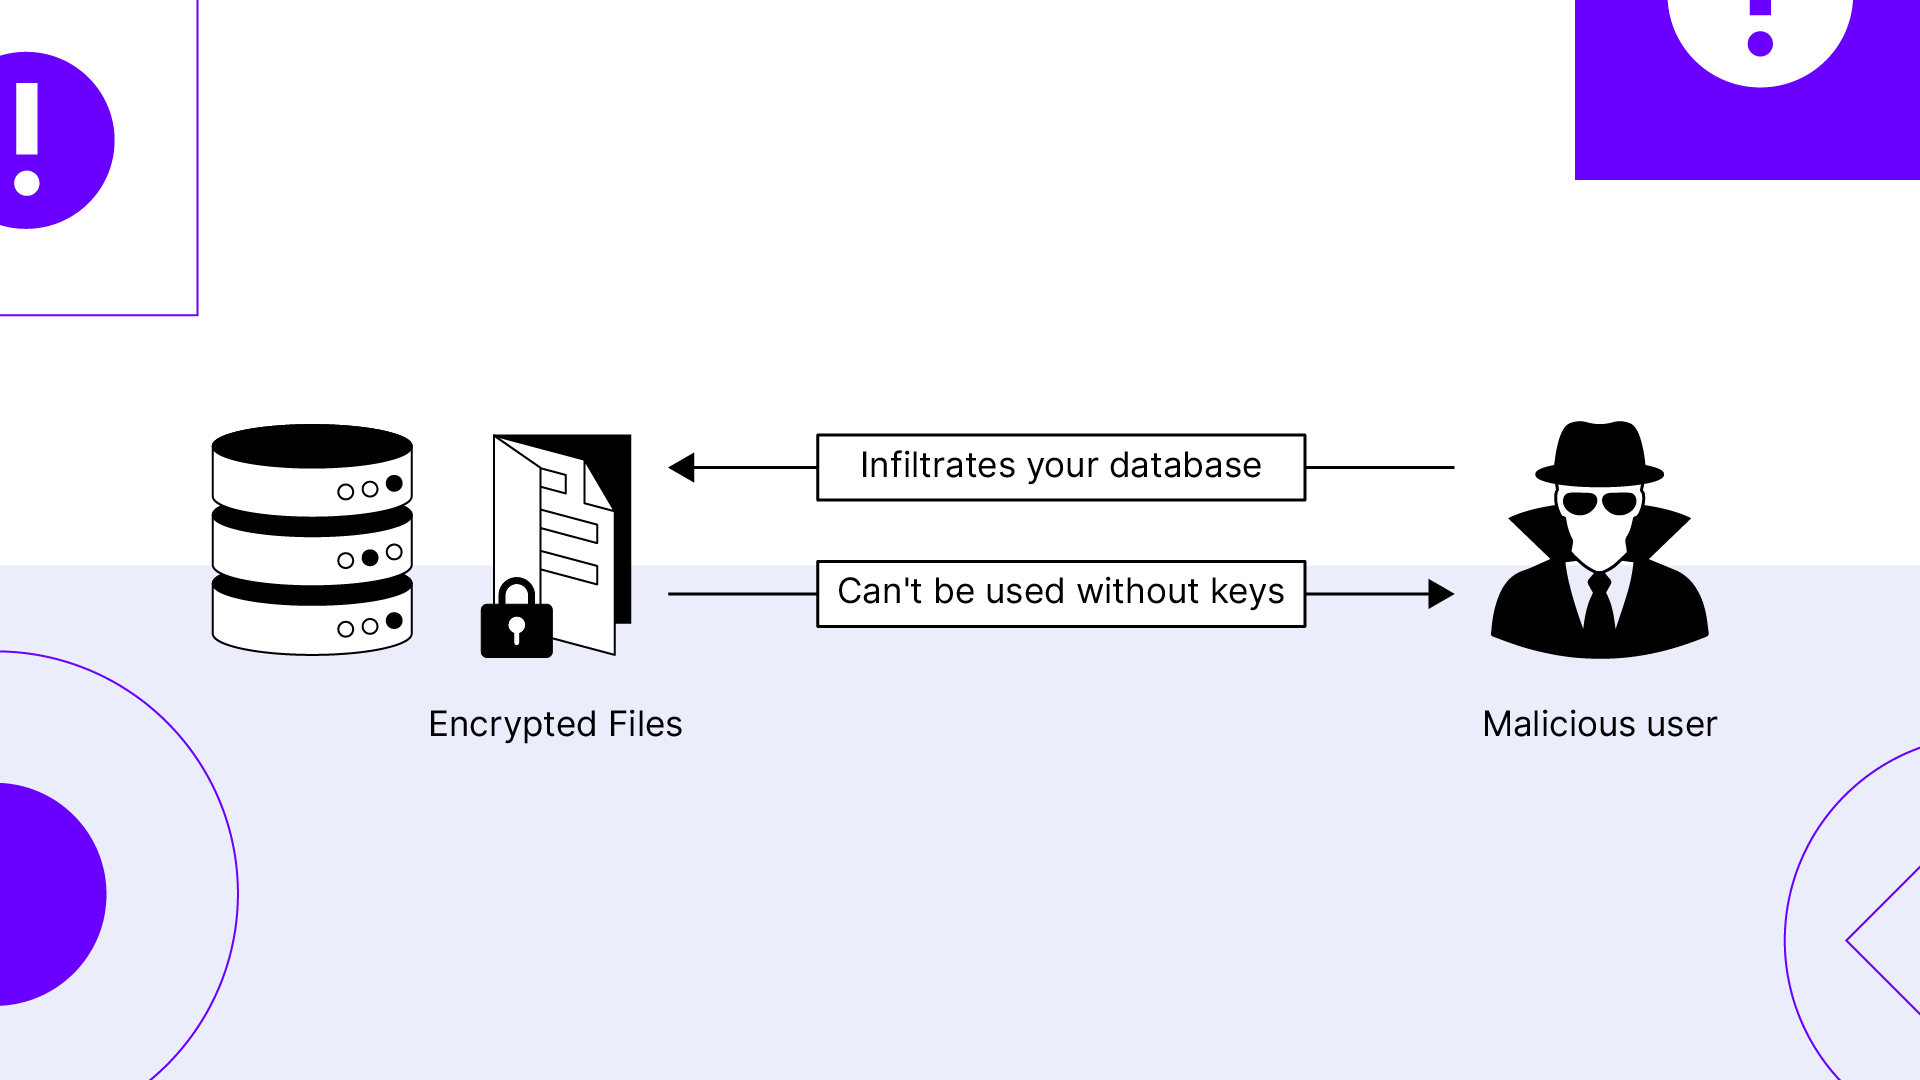 Only authorized users can access encrypted data.